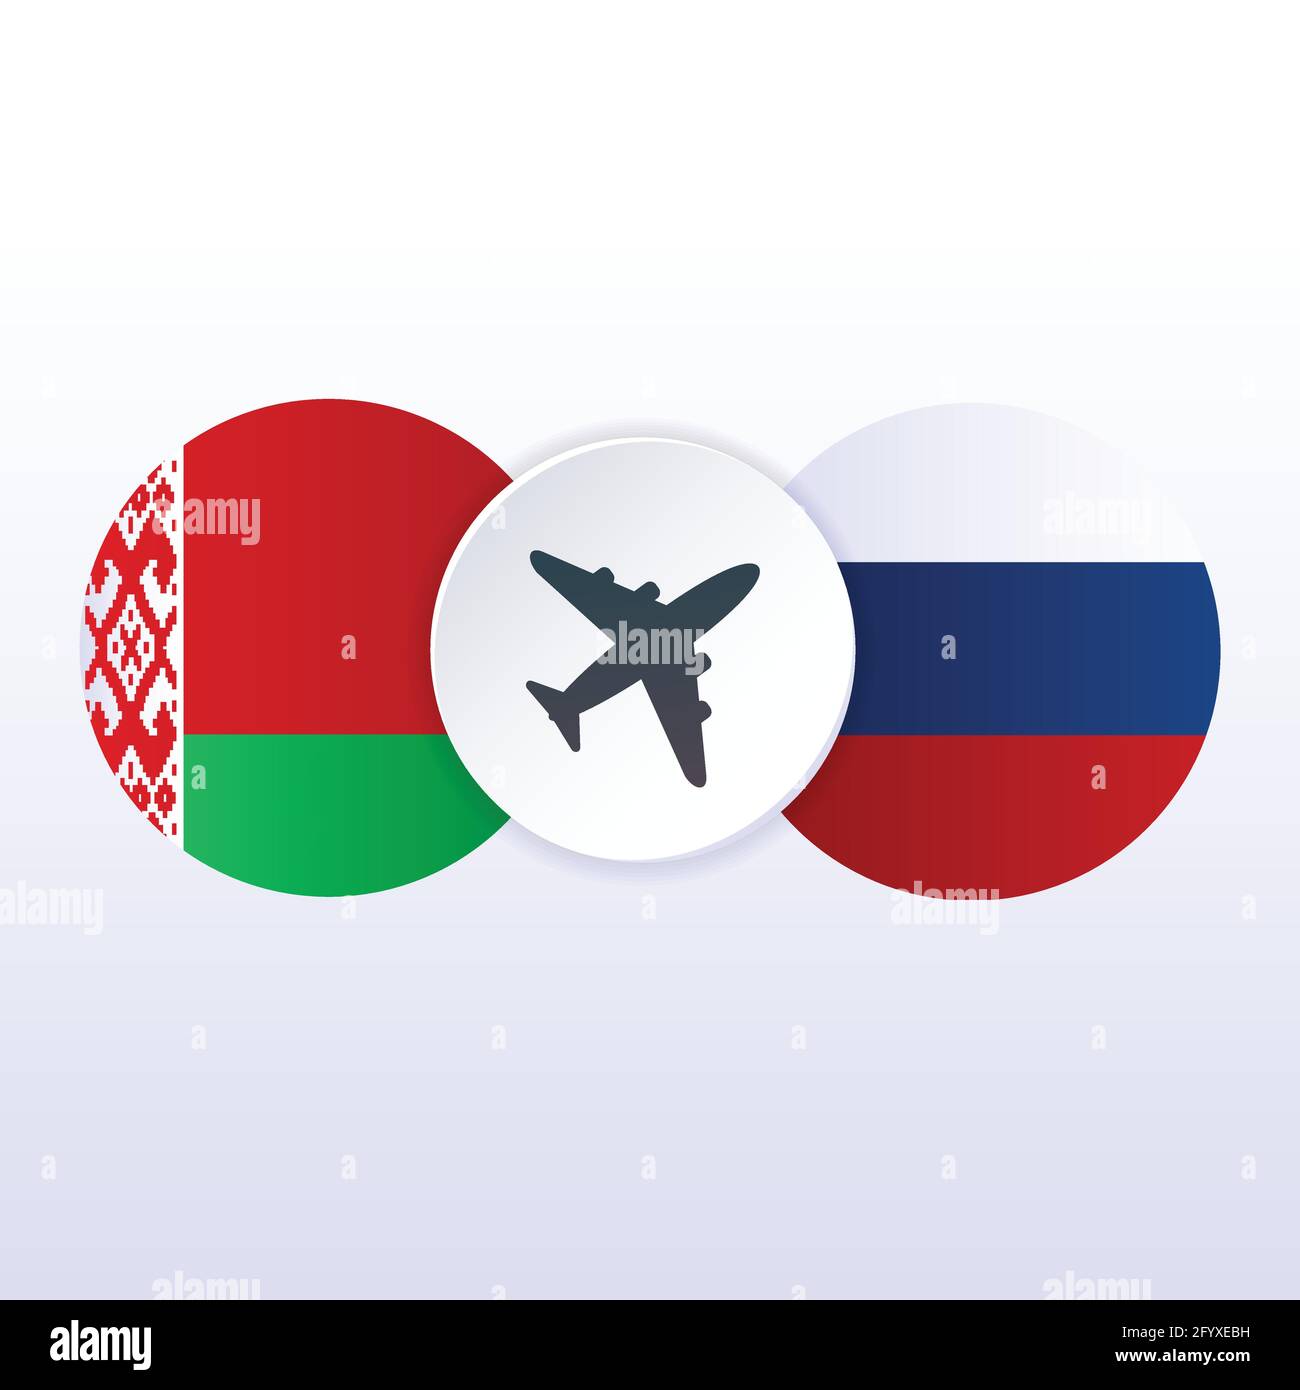 Closure airspace of Russia and Belarus vector illustration. Tariff trade war crisis, relations, cooperation strategy. Concept for web page, banner, pr Stock Vector